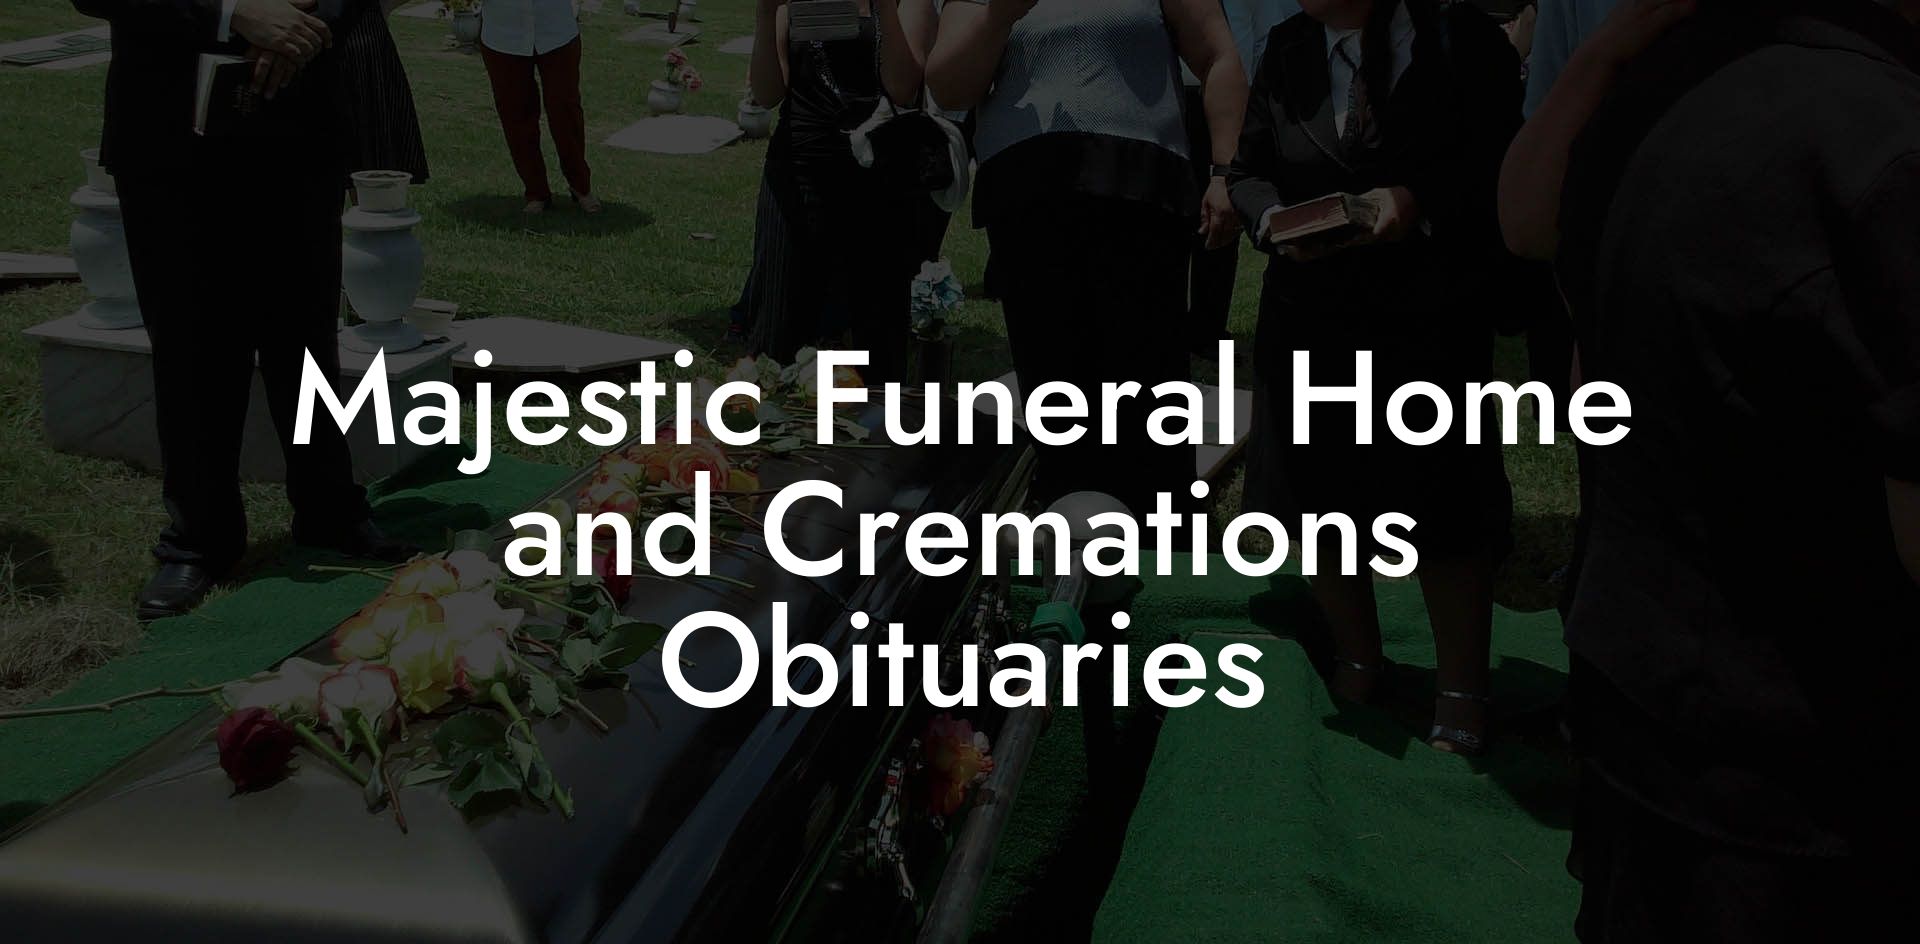 Majestic Funeral Home and Cremations Obituaries